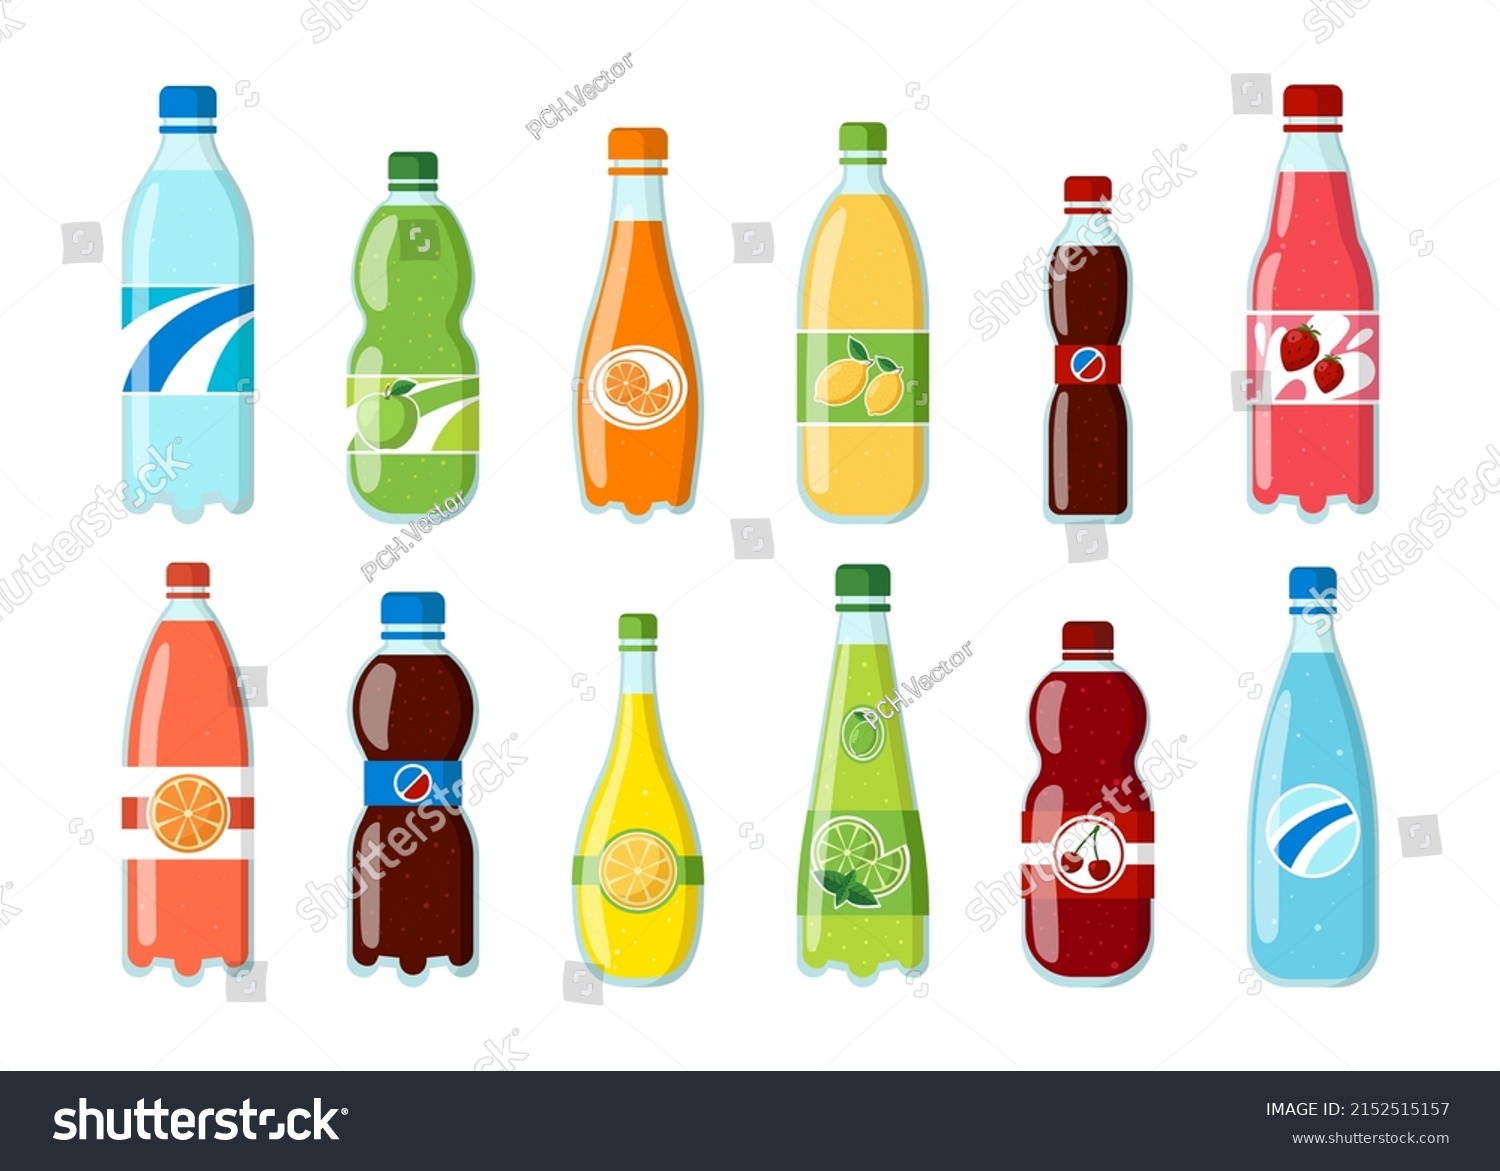 SVG of Bottles of different fizzy drinks vector illustrations set. Soda, water, juice in plastic or glass bottles, beverages with different flavors isolated on white background. Beverage, refreshment concept svg